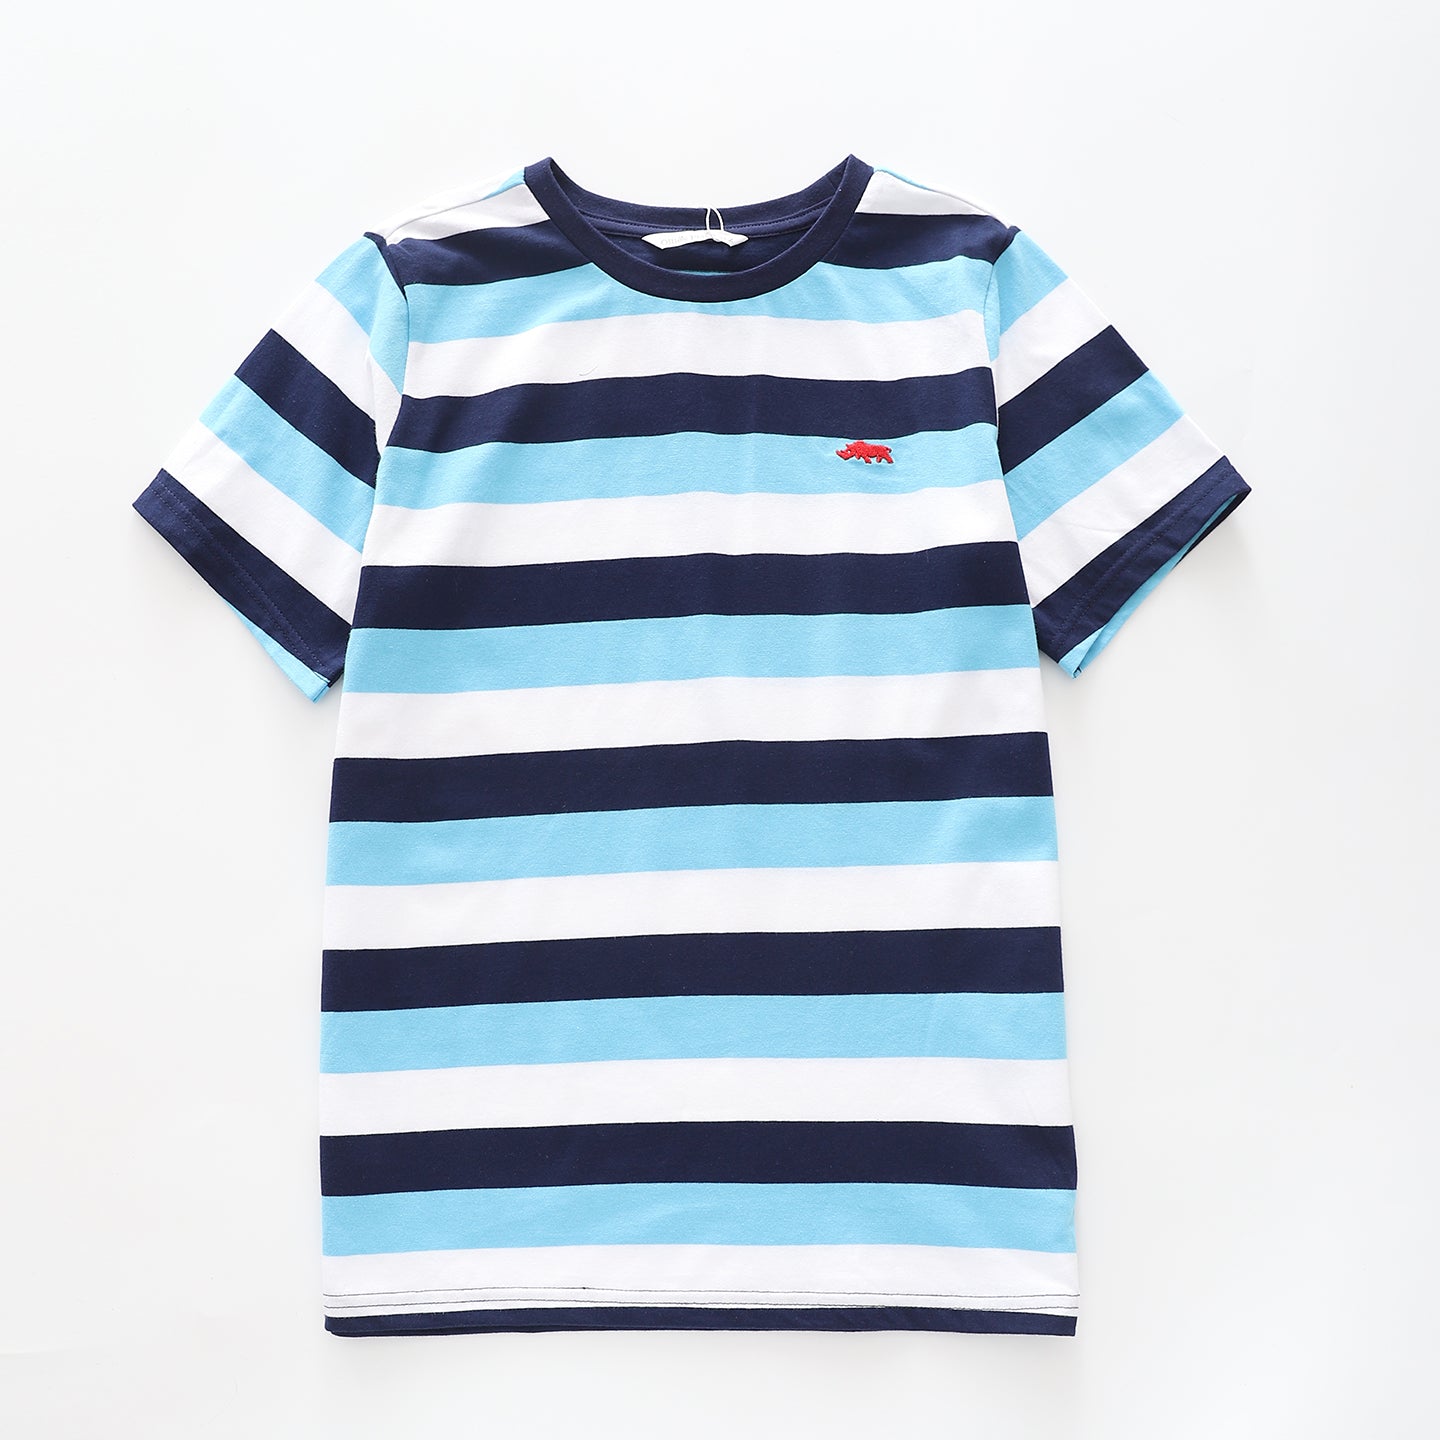 Boy's Blue and Navy Blue Striped Polo Shirt